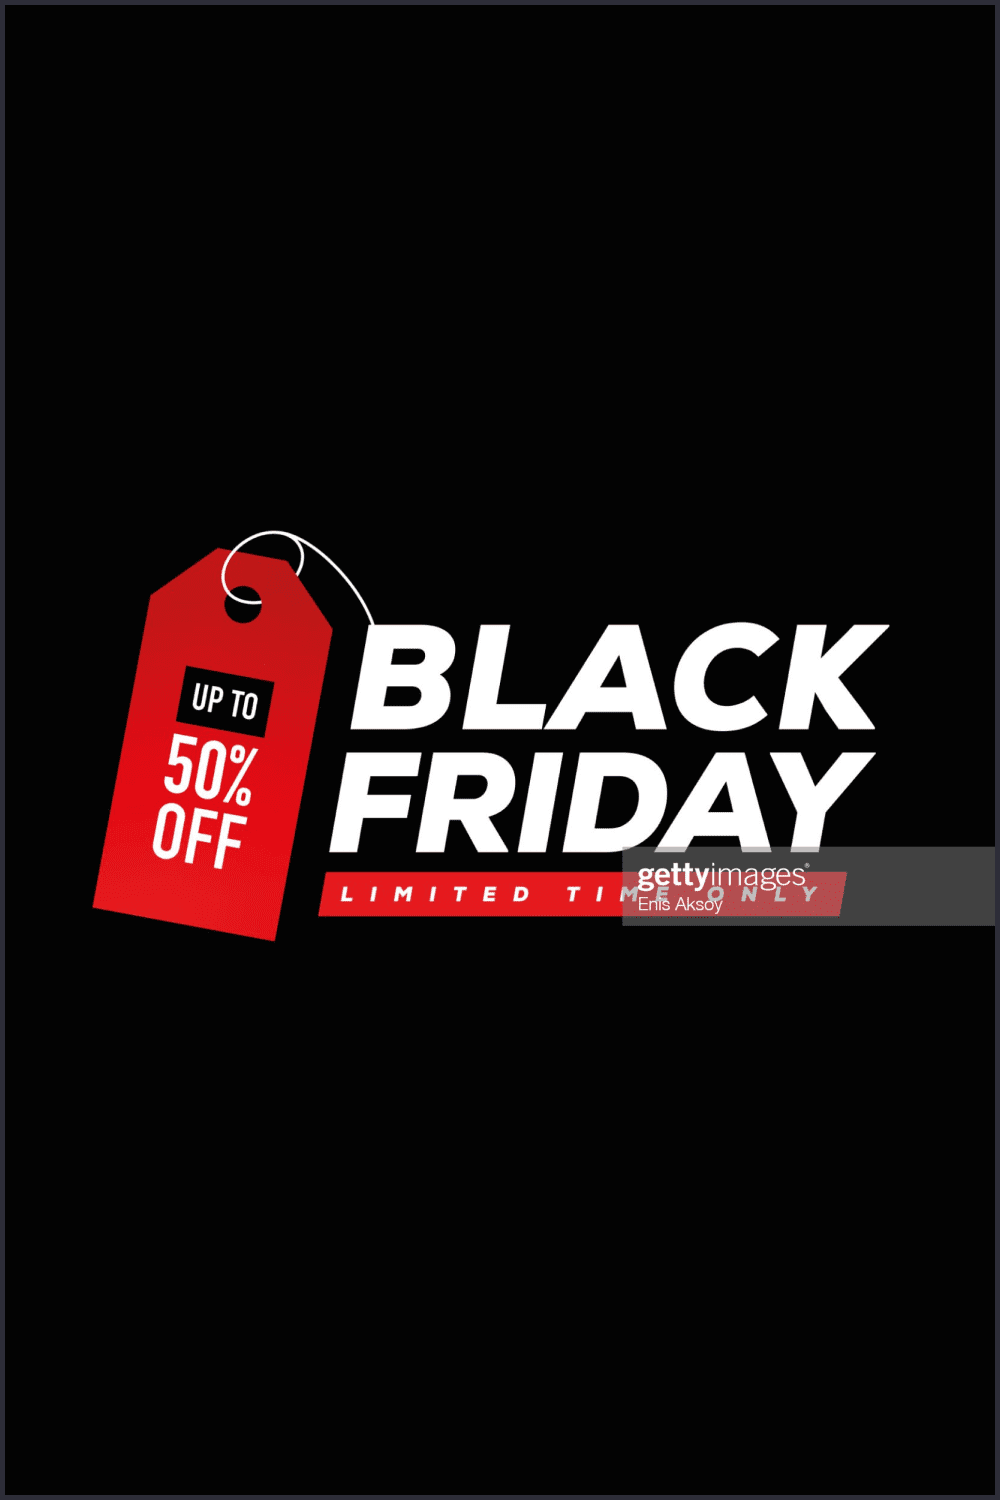 Red sticker with white text Black Friday on black background.